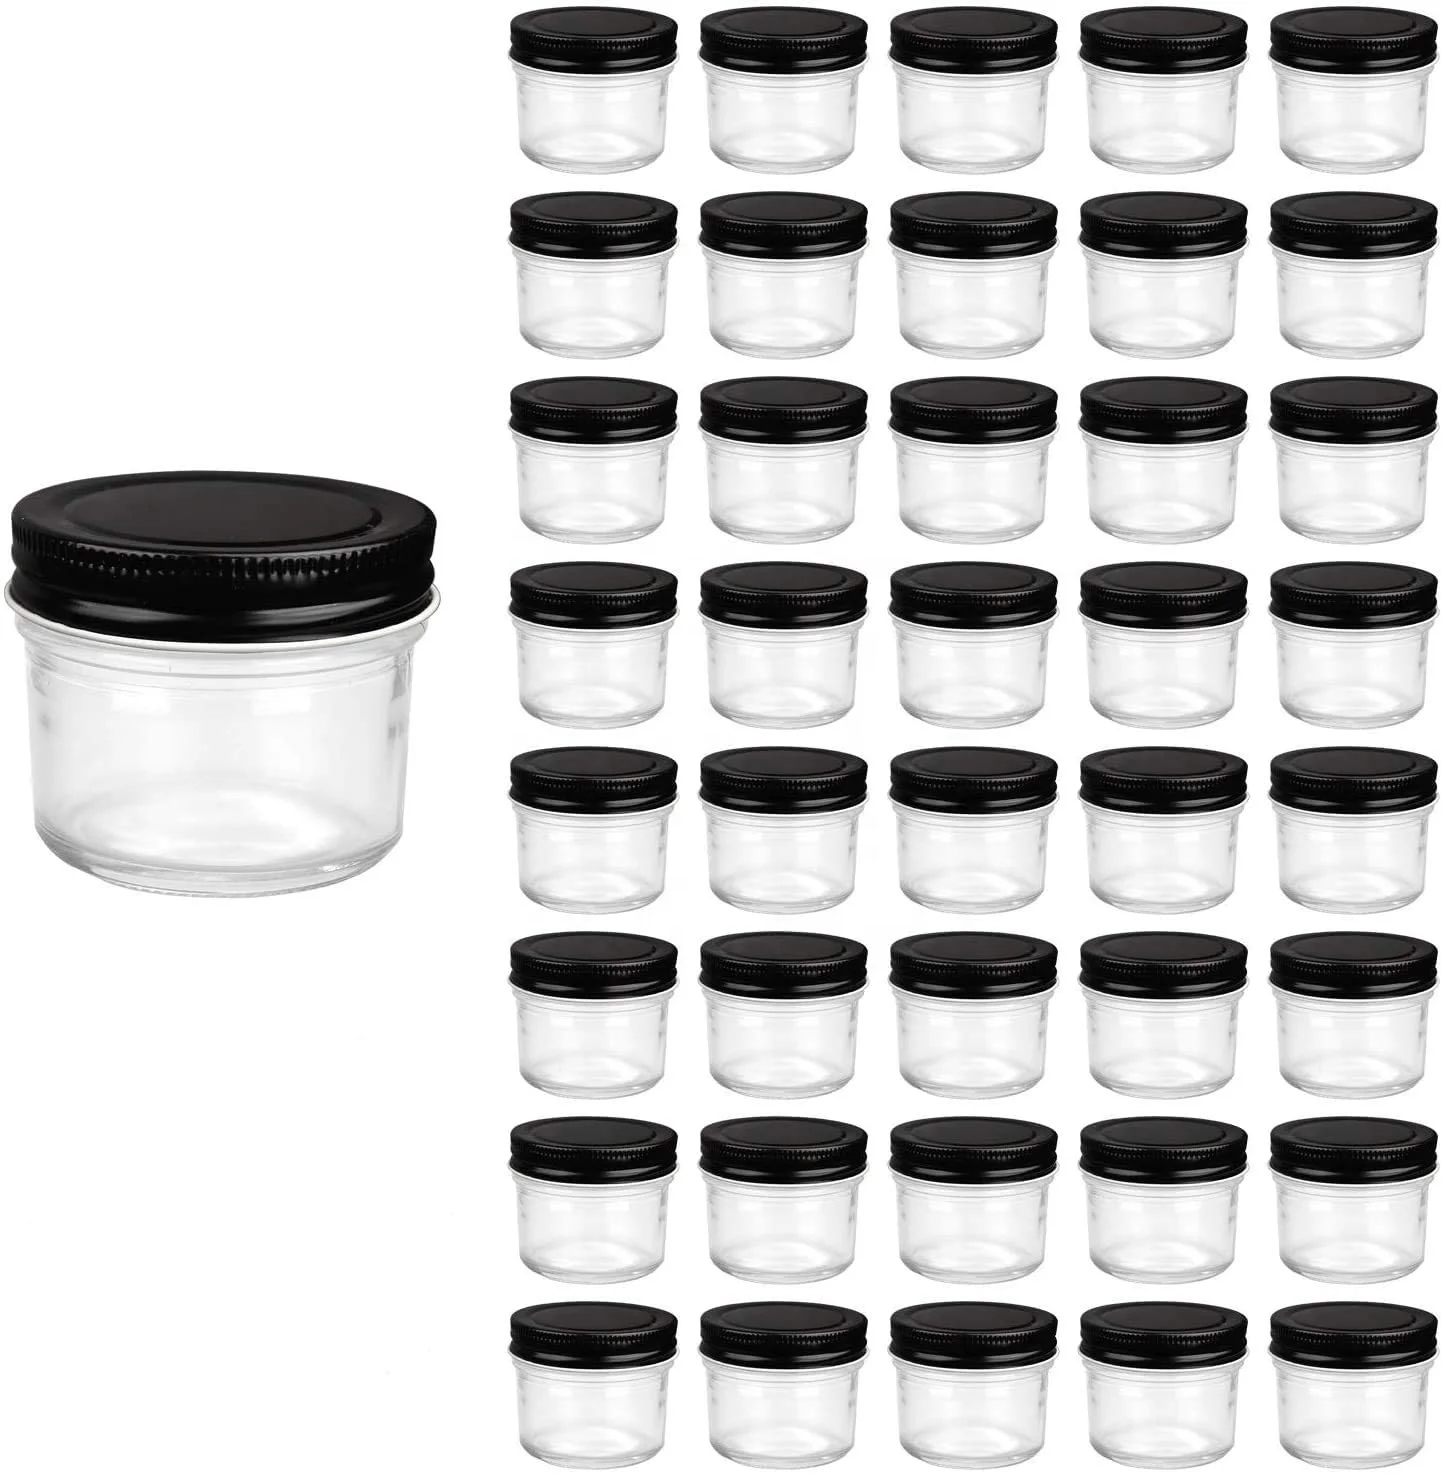 

Empty Wide Mouth round Glass Jar 4oz Small Mason Jar With Black Lids For Food Jam Honey Jelly, Clear